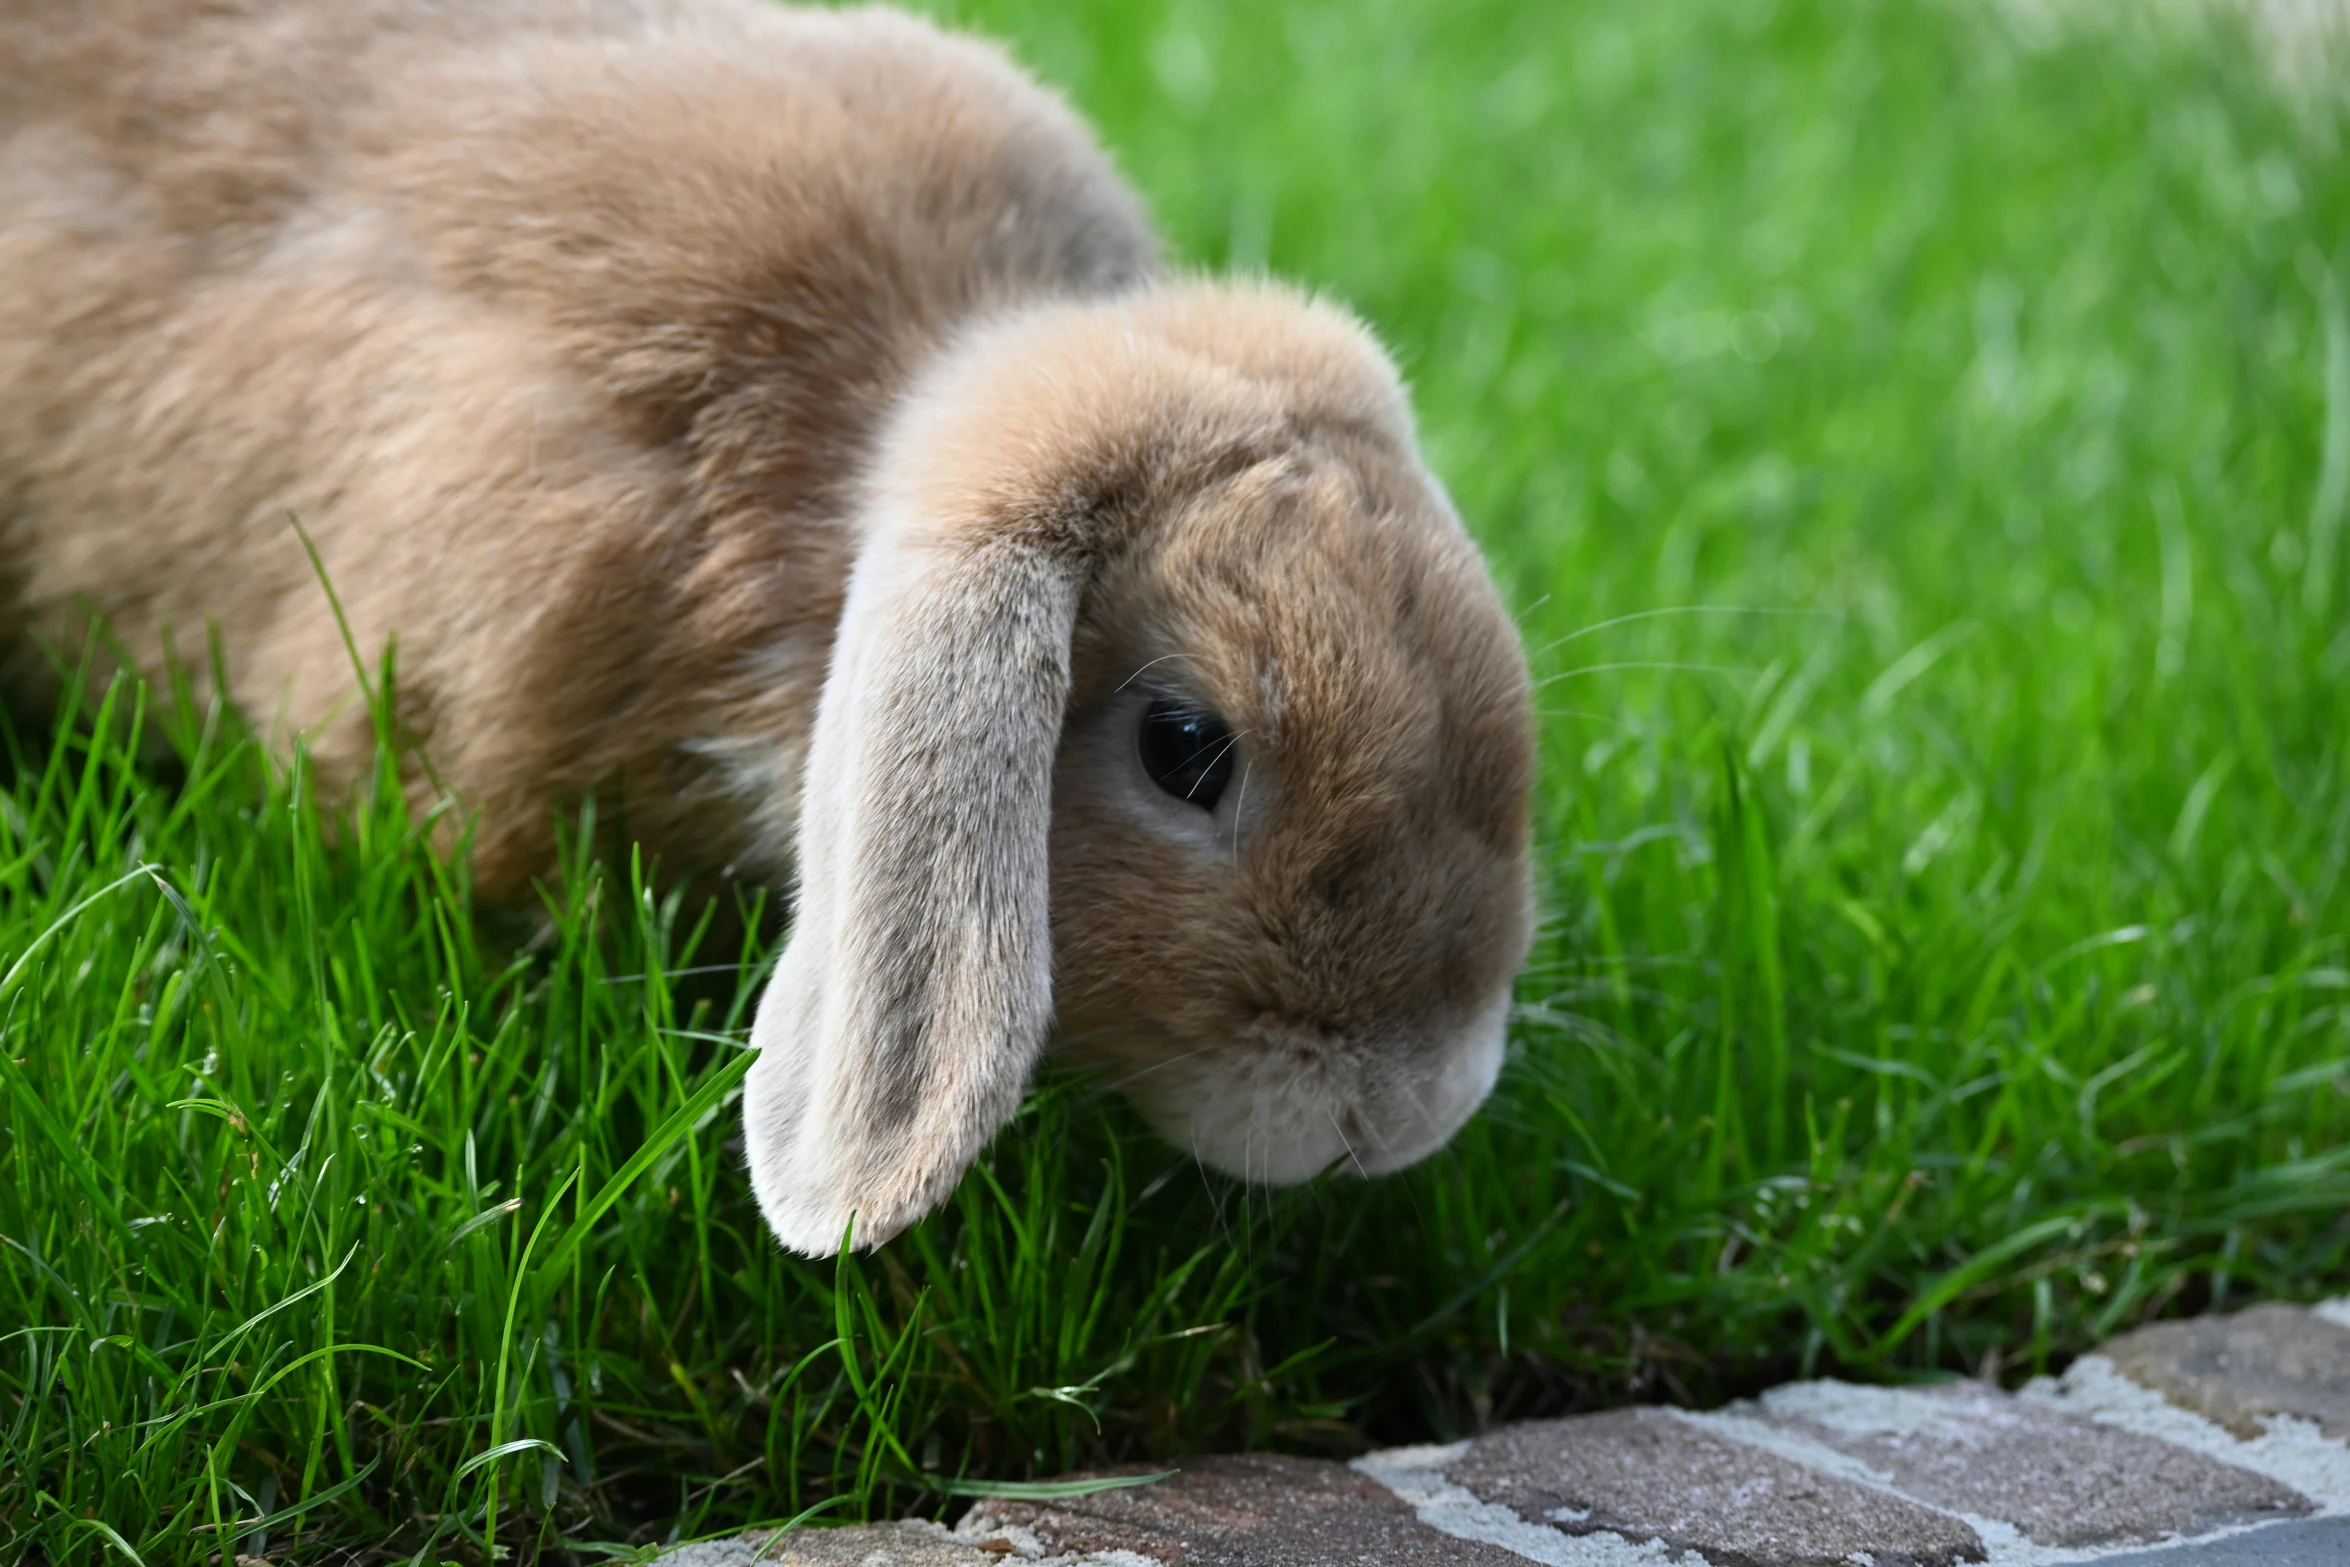 a young rabbit eating grass on the ground